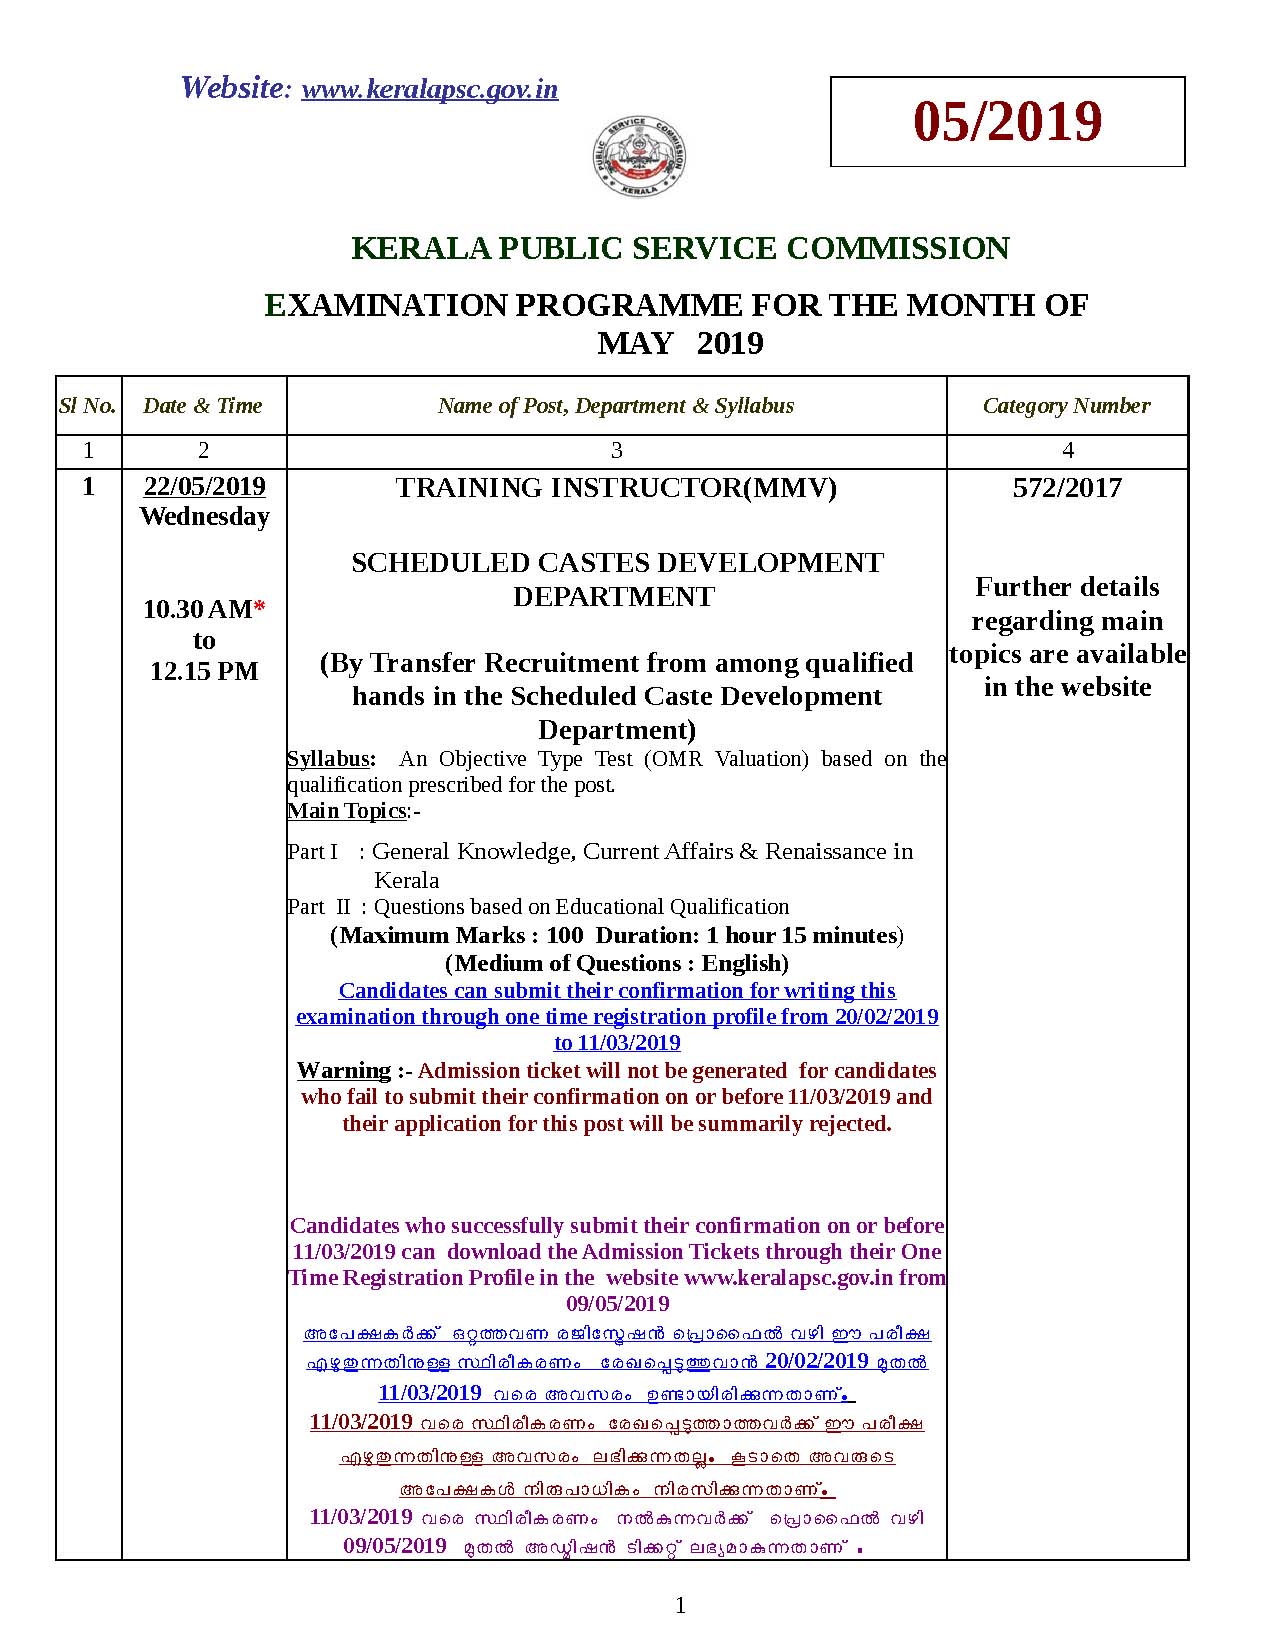 KPSC Examination Programme For The Month Of May 2019 - Notification Image 1